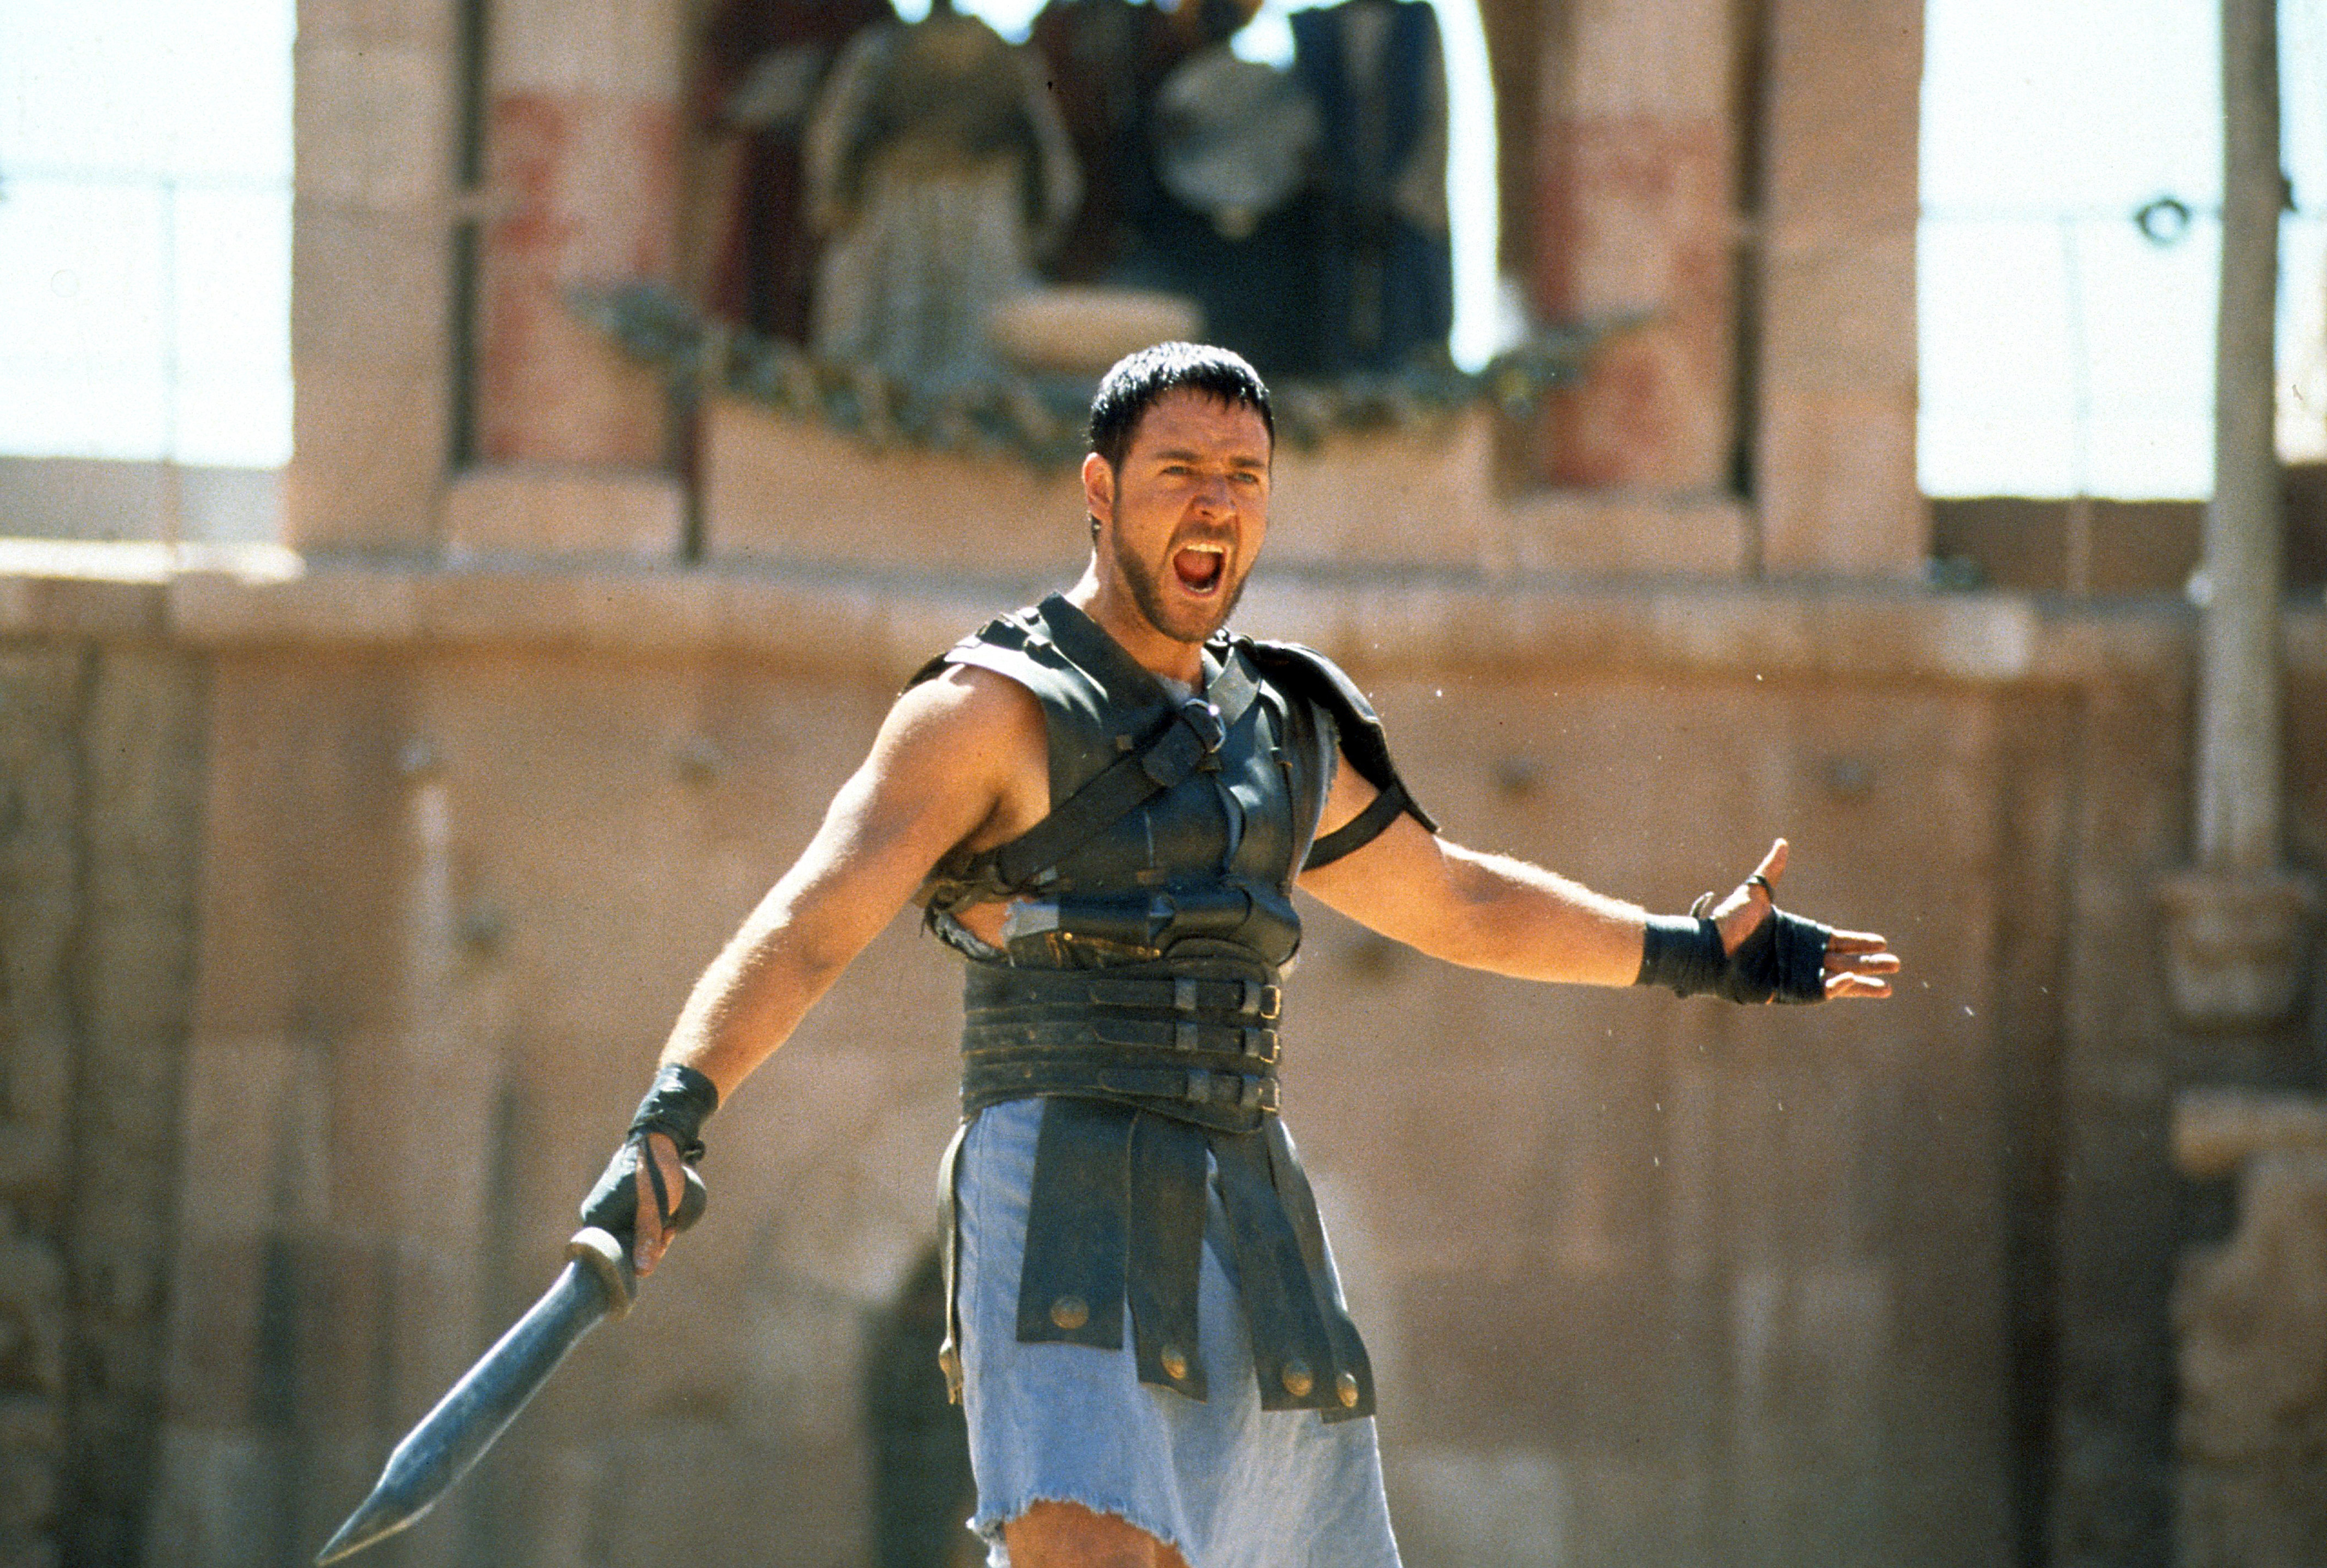 Russell Crowe dans "Gladiator", 2000 | Source : Getty Images